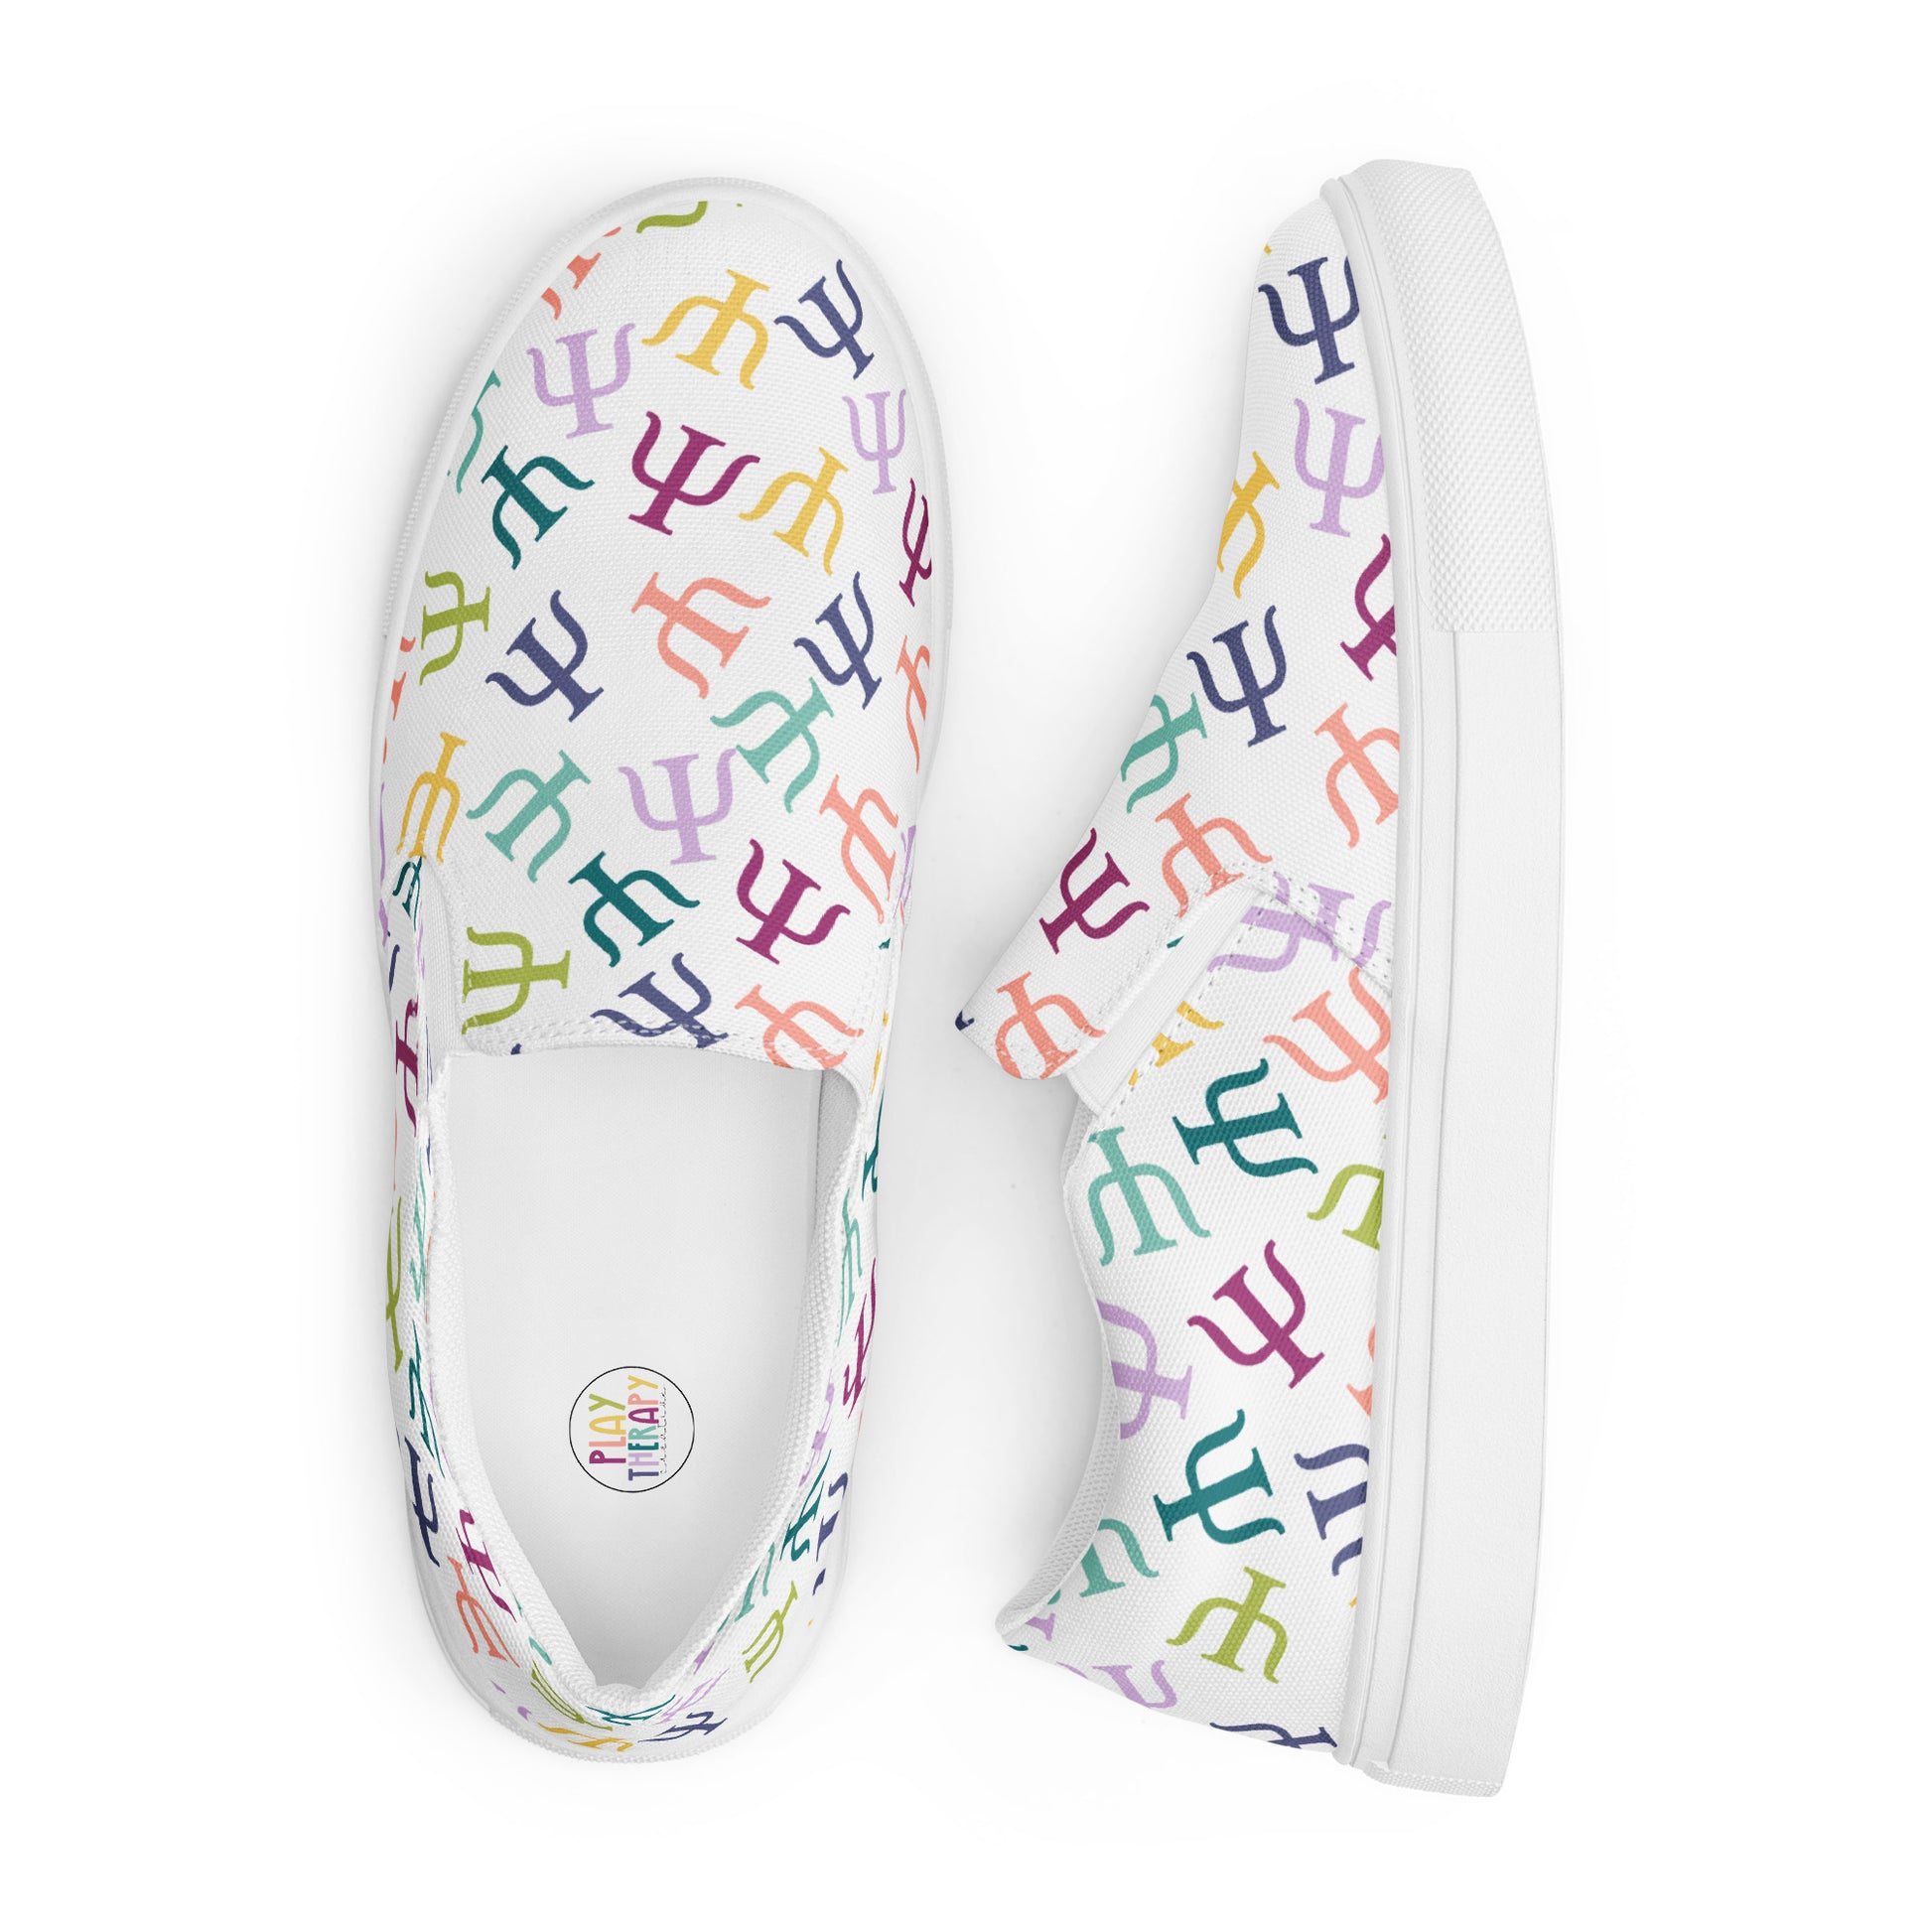 Teal Psych Symbol Slip-on Canvas Shoes (Women's Sizes) – Play Therapy  Creative